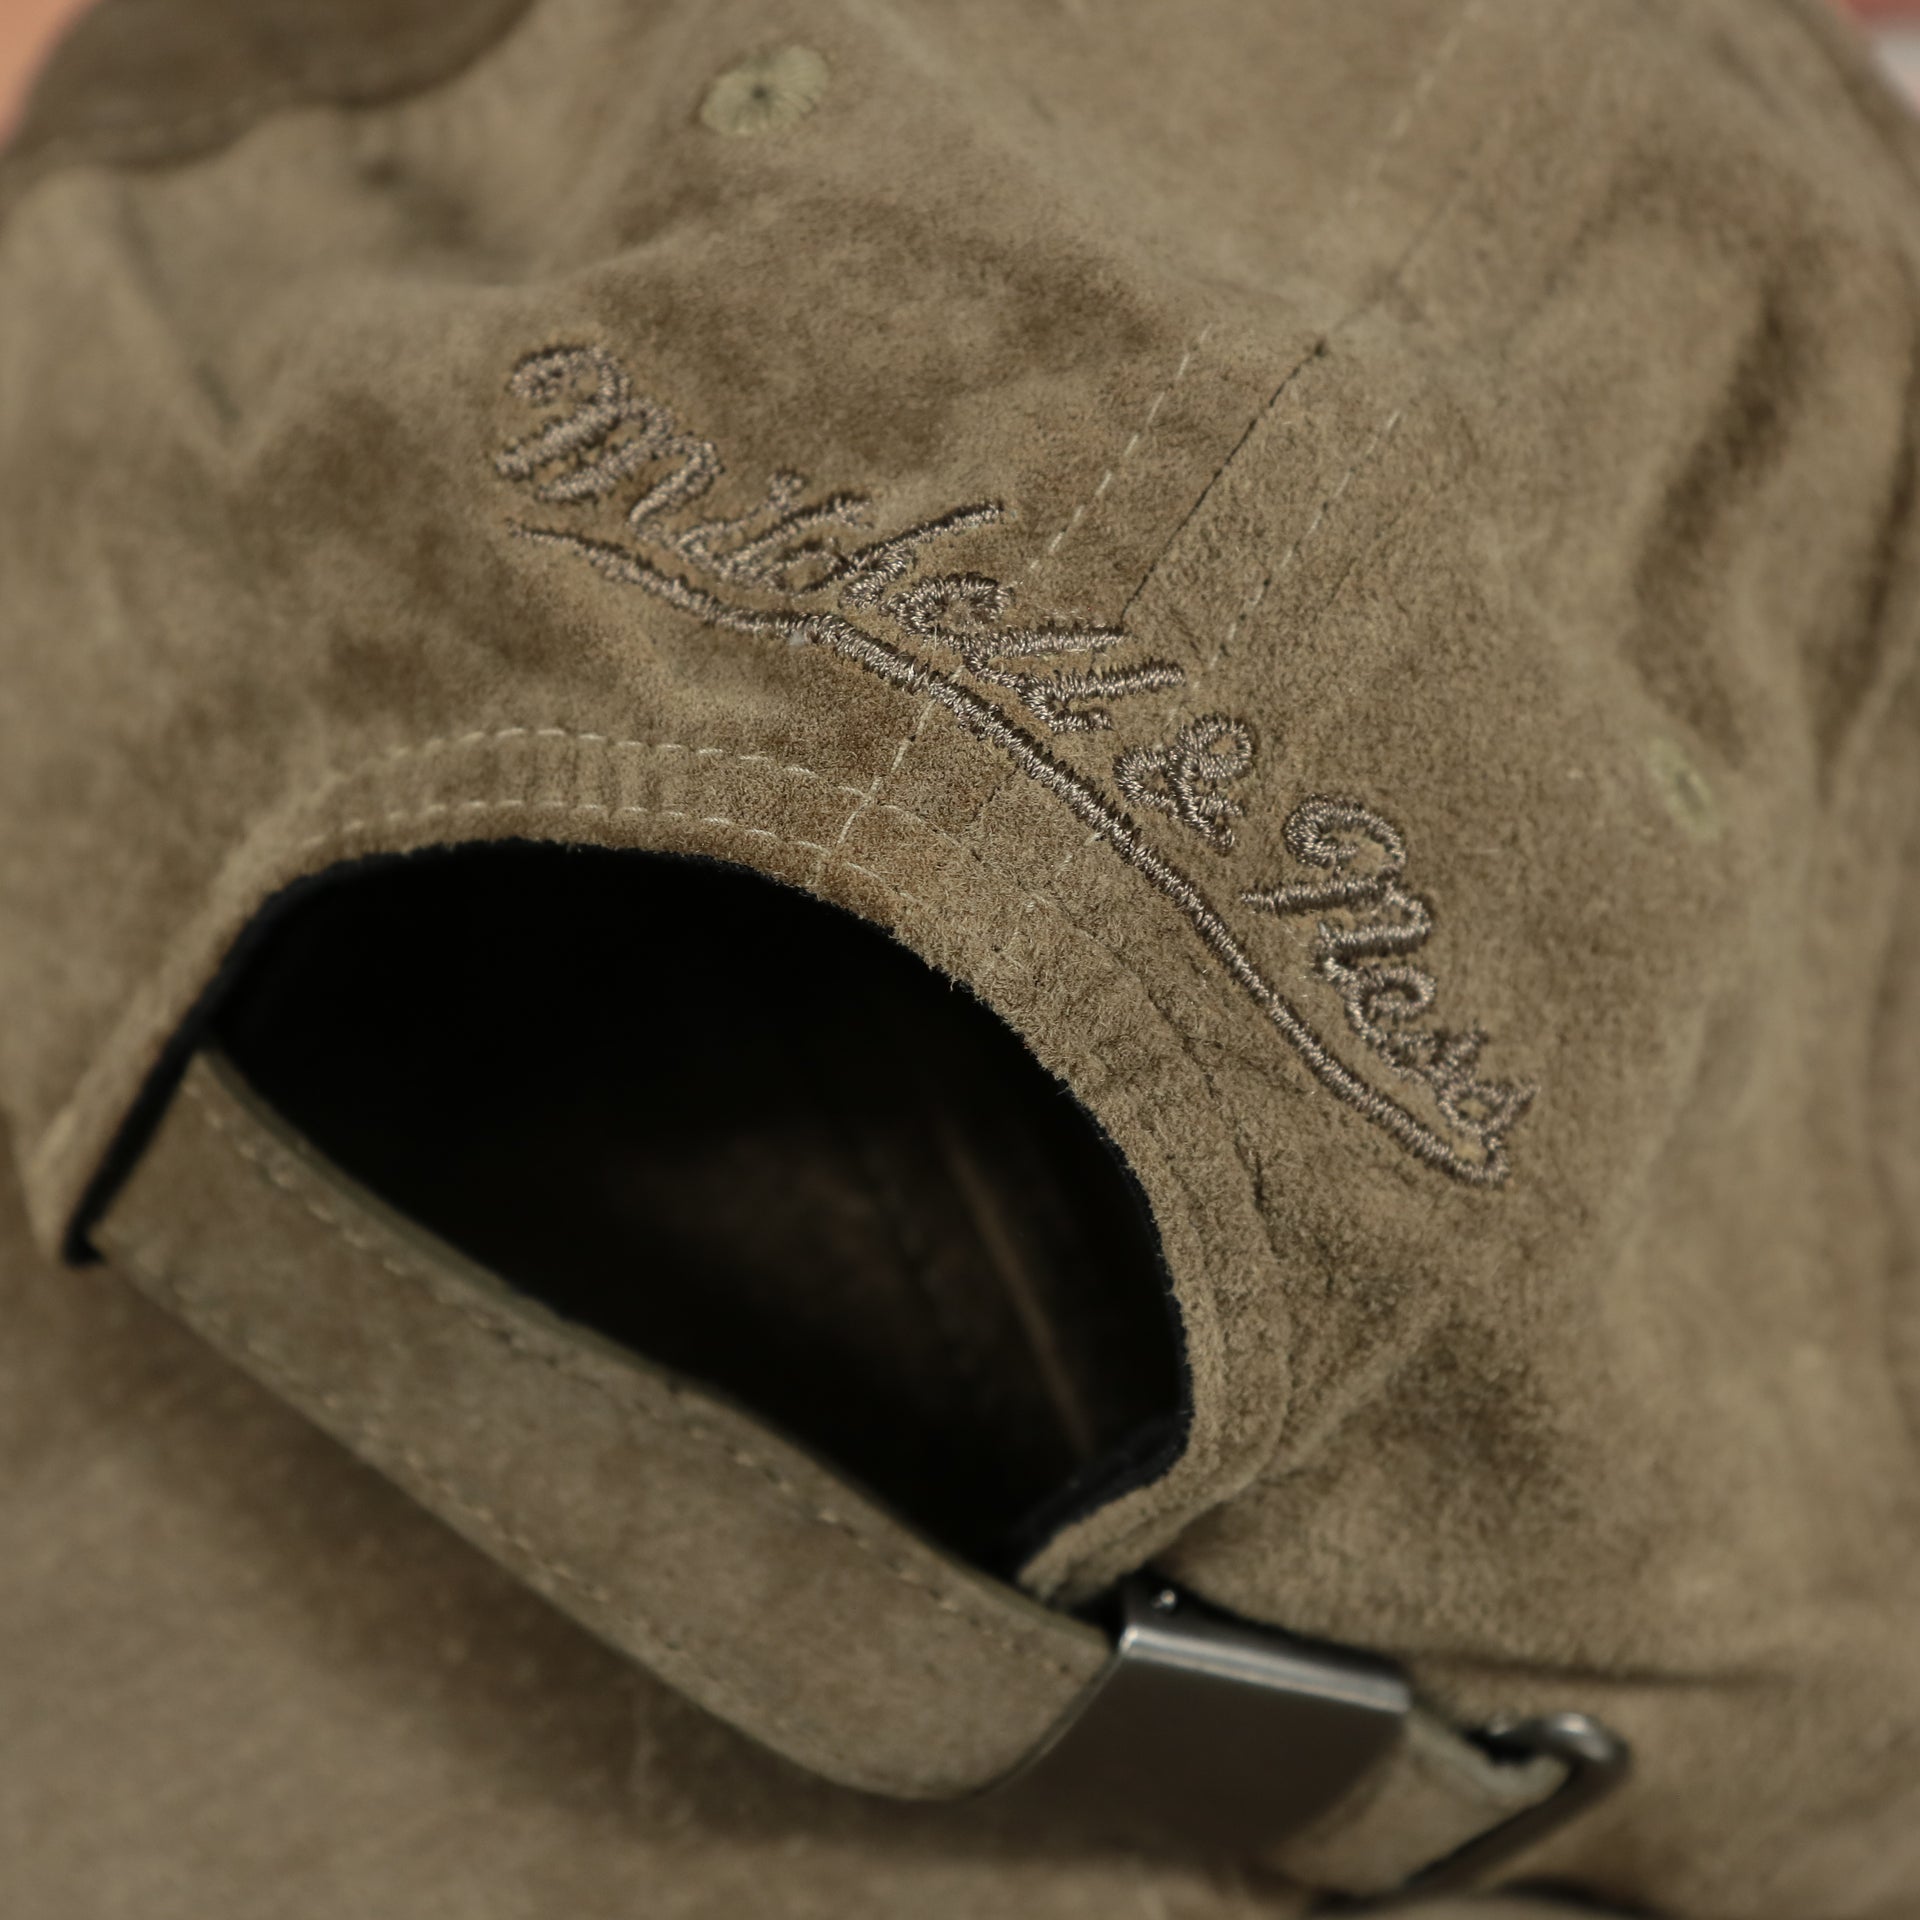 mitchell and ness logo on the Mitchell and Ness Light Brown Suede Blank Adjustable Dad Hat